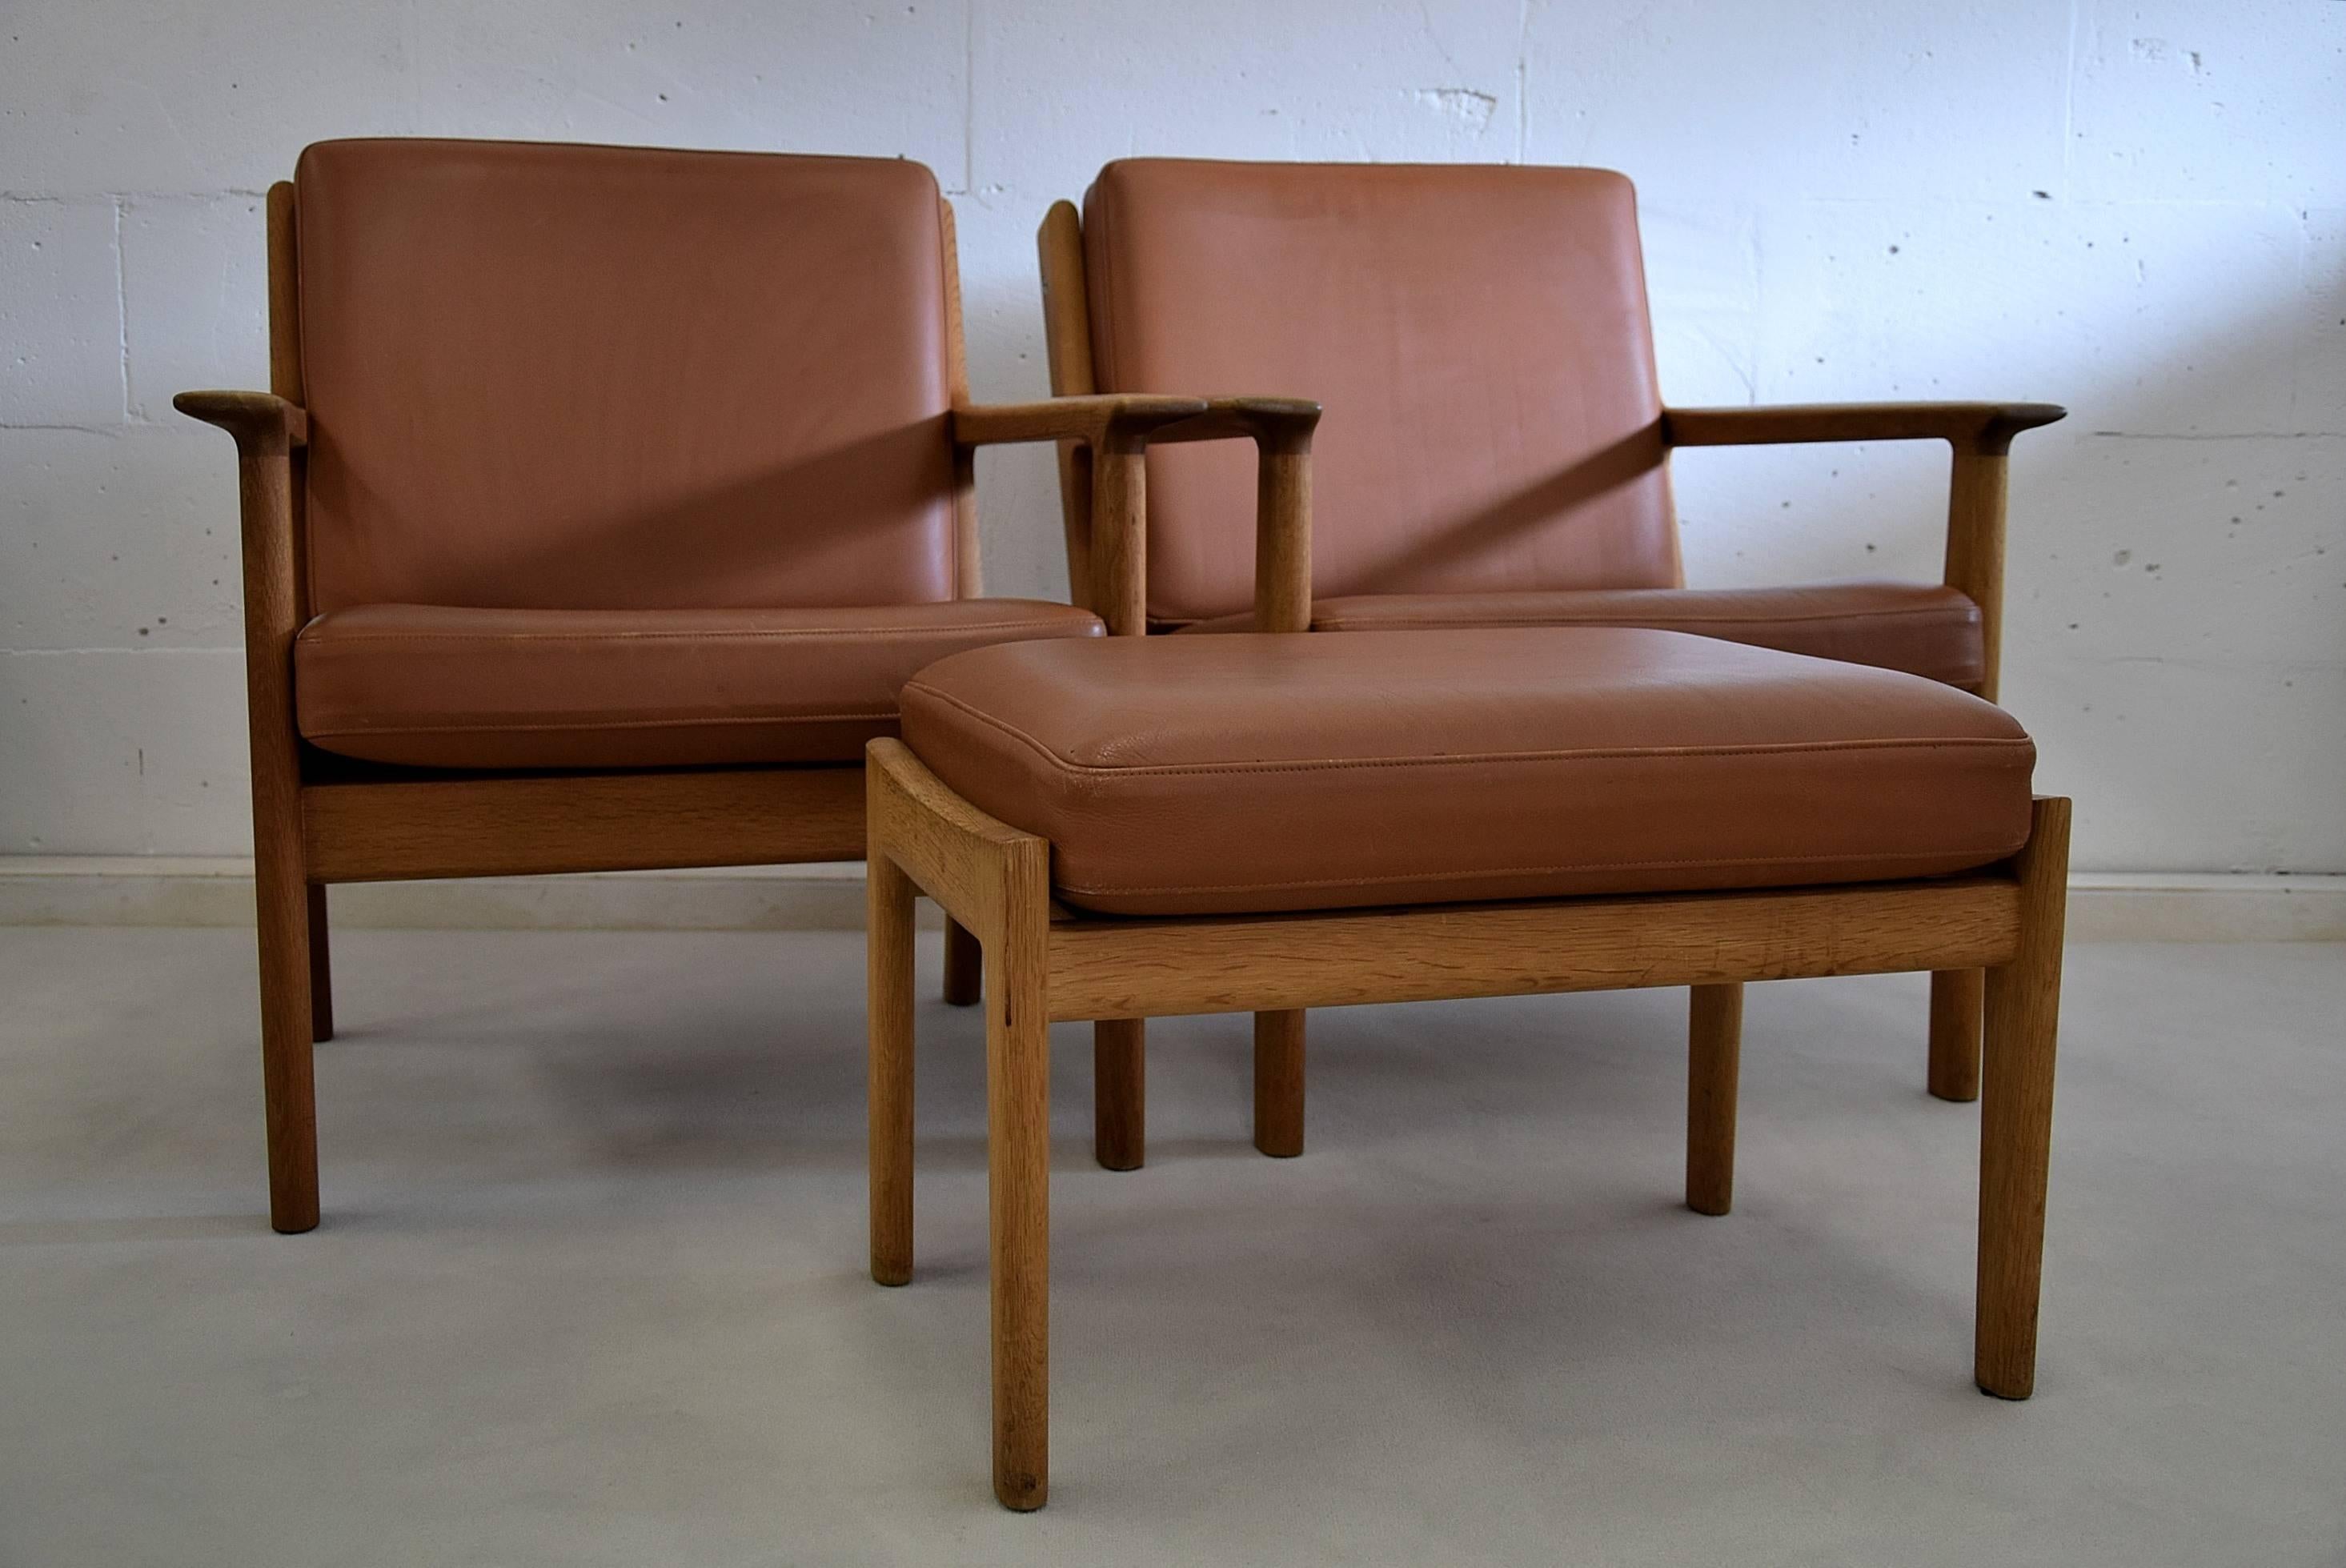 Hans Wegner Mid-Century Modern hocker and lounge chairs
Sophisticated stylish pair of GE265 lounge chairs and footstool designed by Hans Wegner in the late 1950s for GETAMA, Denmark.

Both the chairs and the hocker come with their original leather